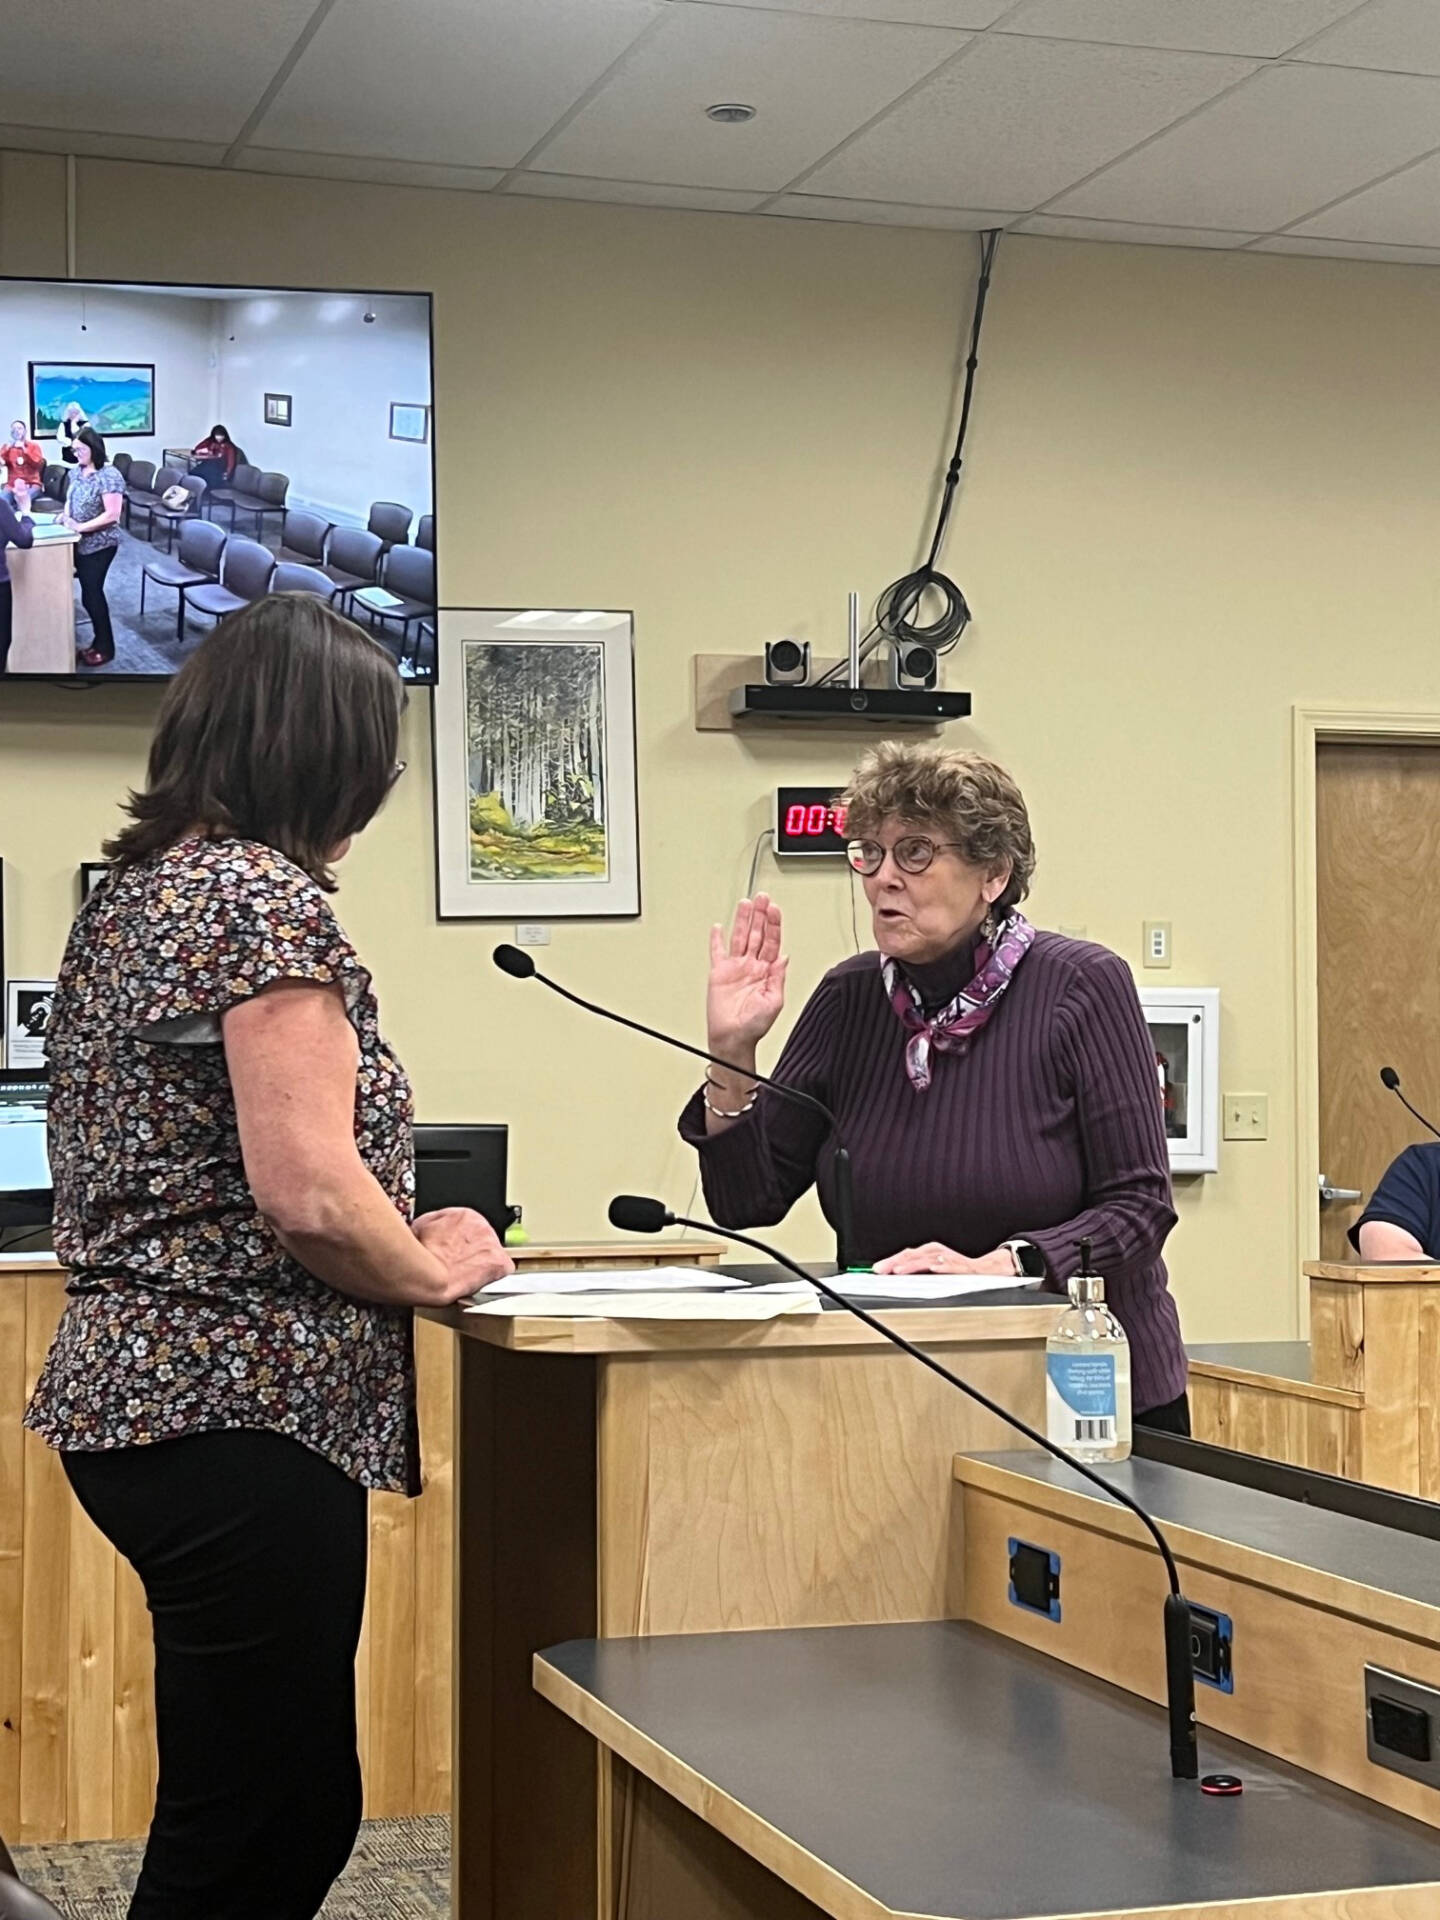 Newly re-elected Homer city council member Caroline Venuti (right) recites the oath of office administered by city clerk Melissa Jacobsen (left) during the city council regular meeting on Monday, Oct. 9, 2023 in the Cowles Council Chambers at City Hall in Homer, Alaska. Photo courtesy of Mike Illg